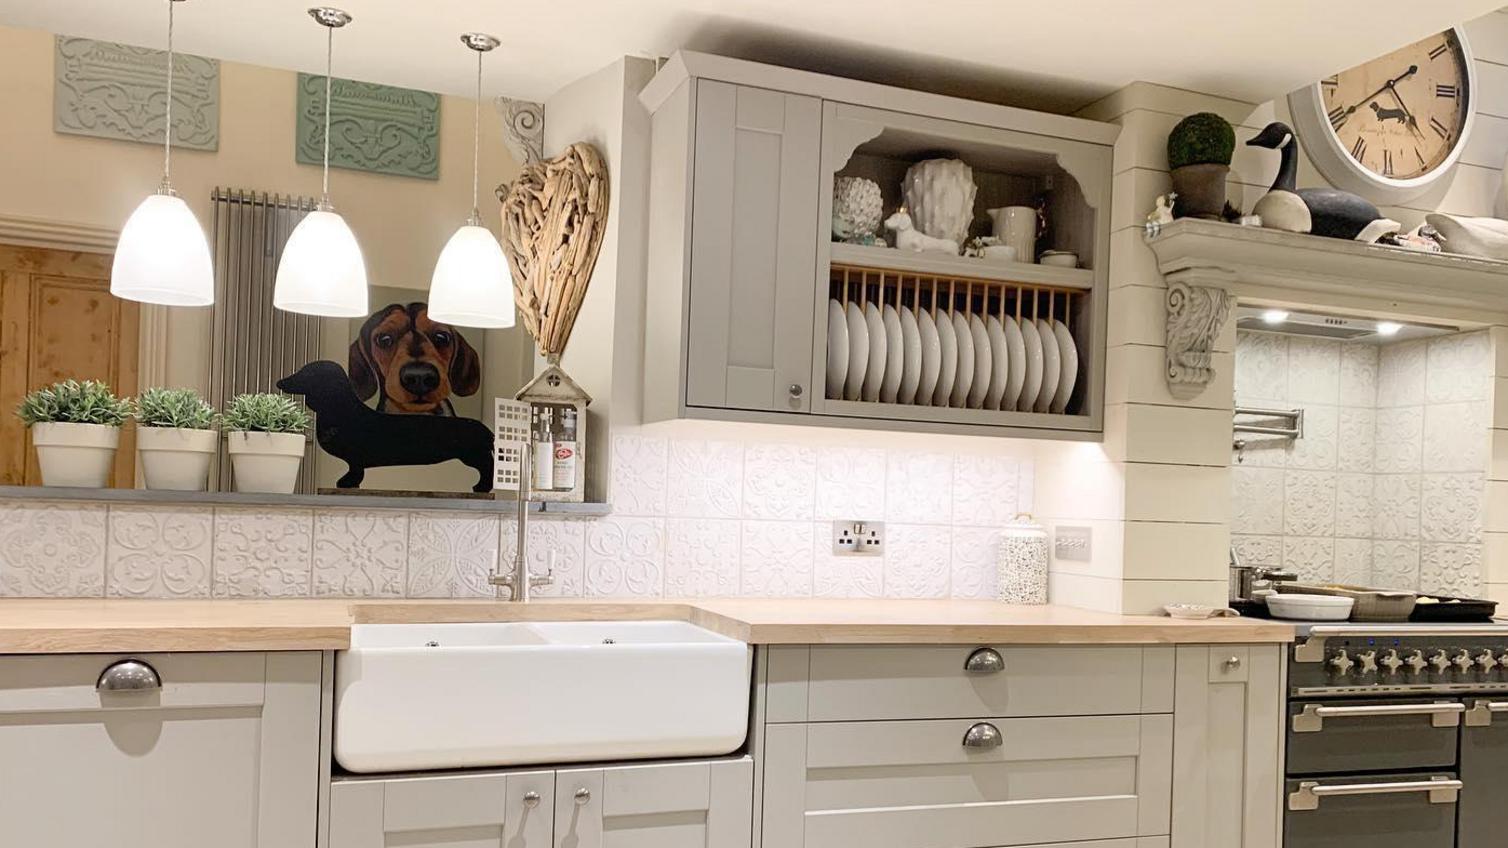 Grey shaker kitchen with a wall-mounted kitchen storage idea for displaying plates and crockery.